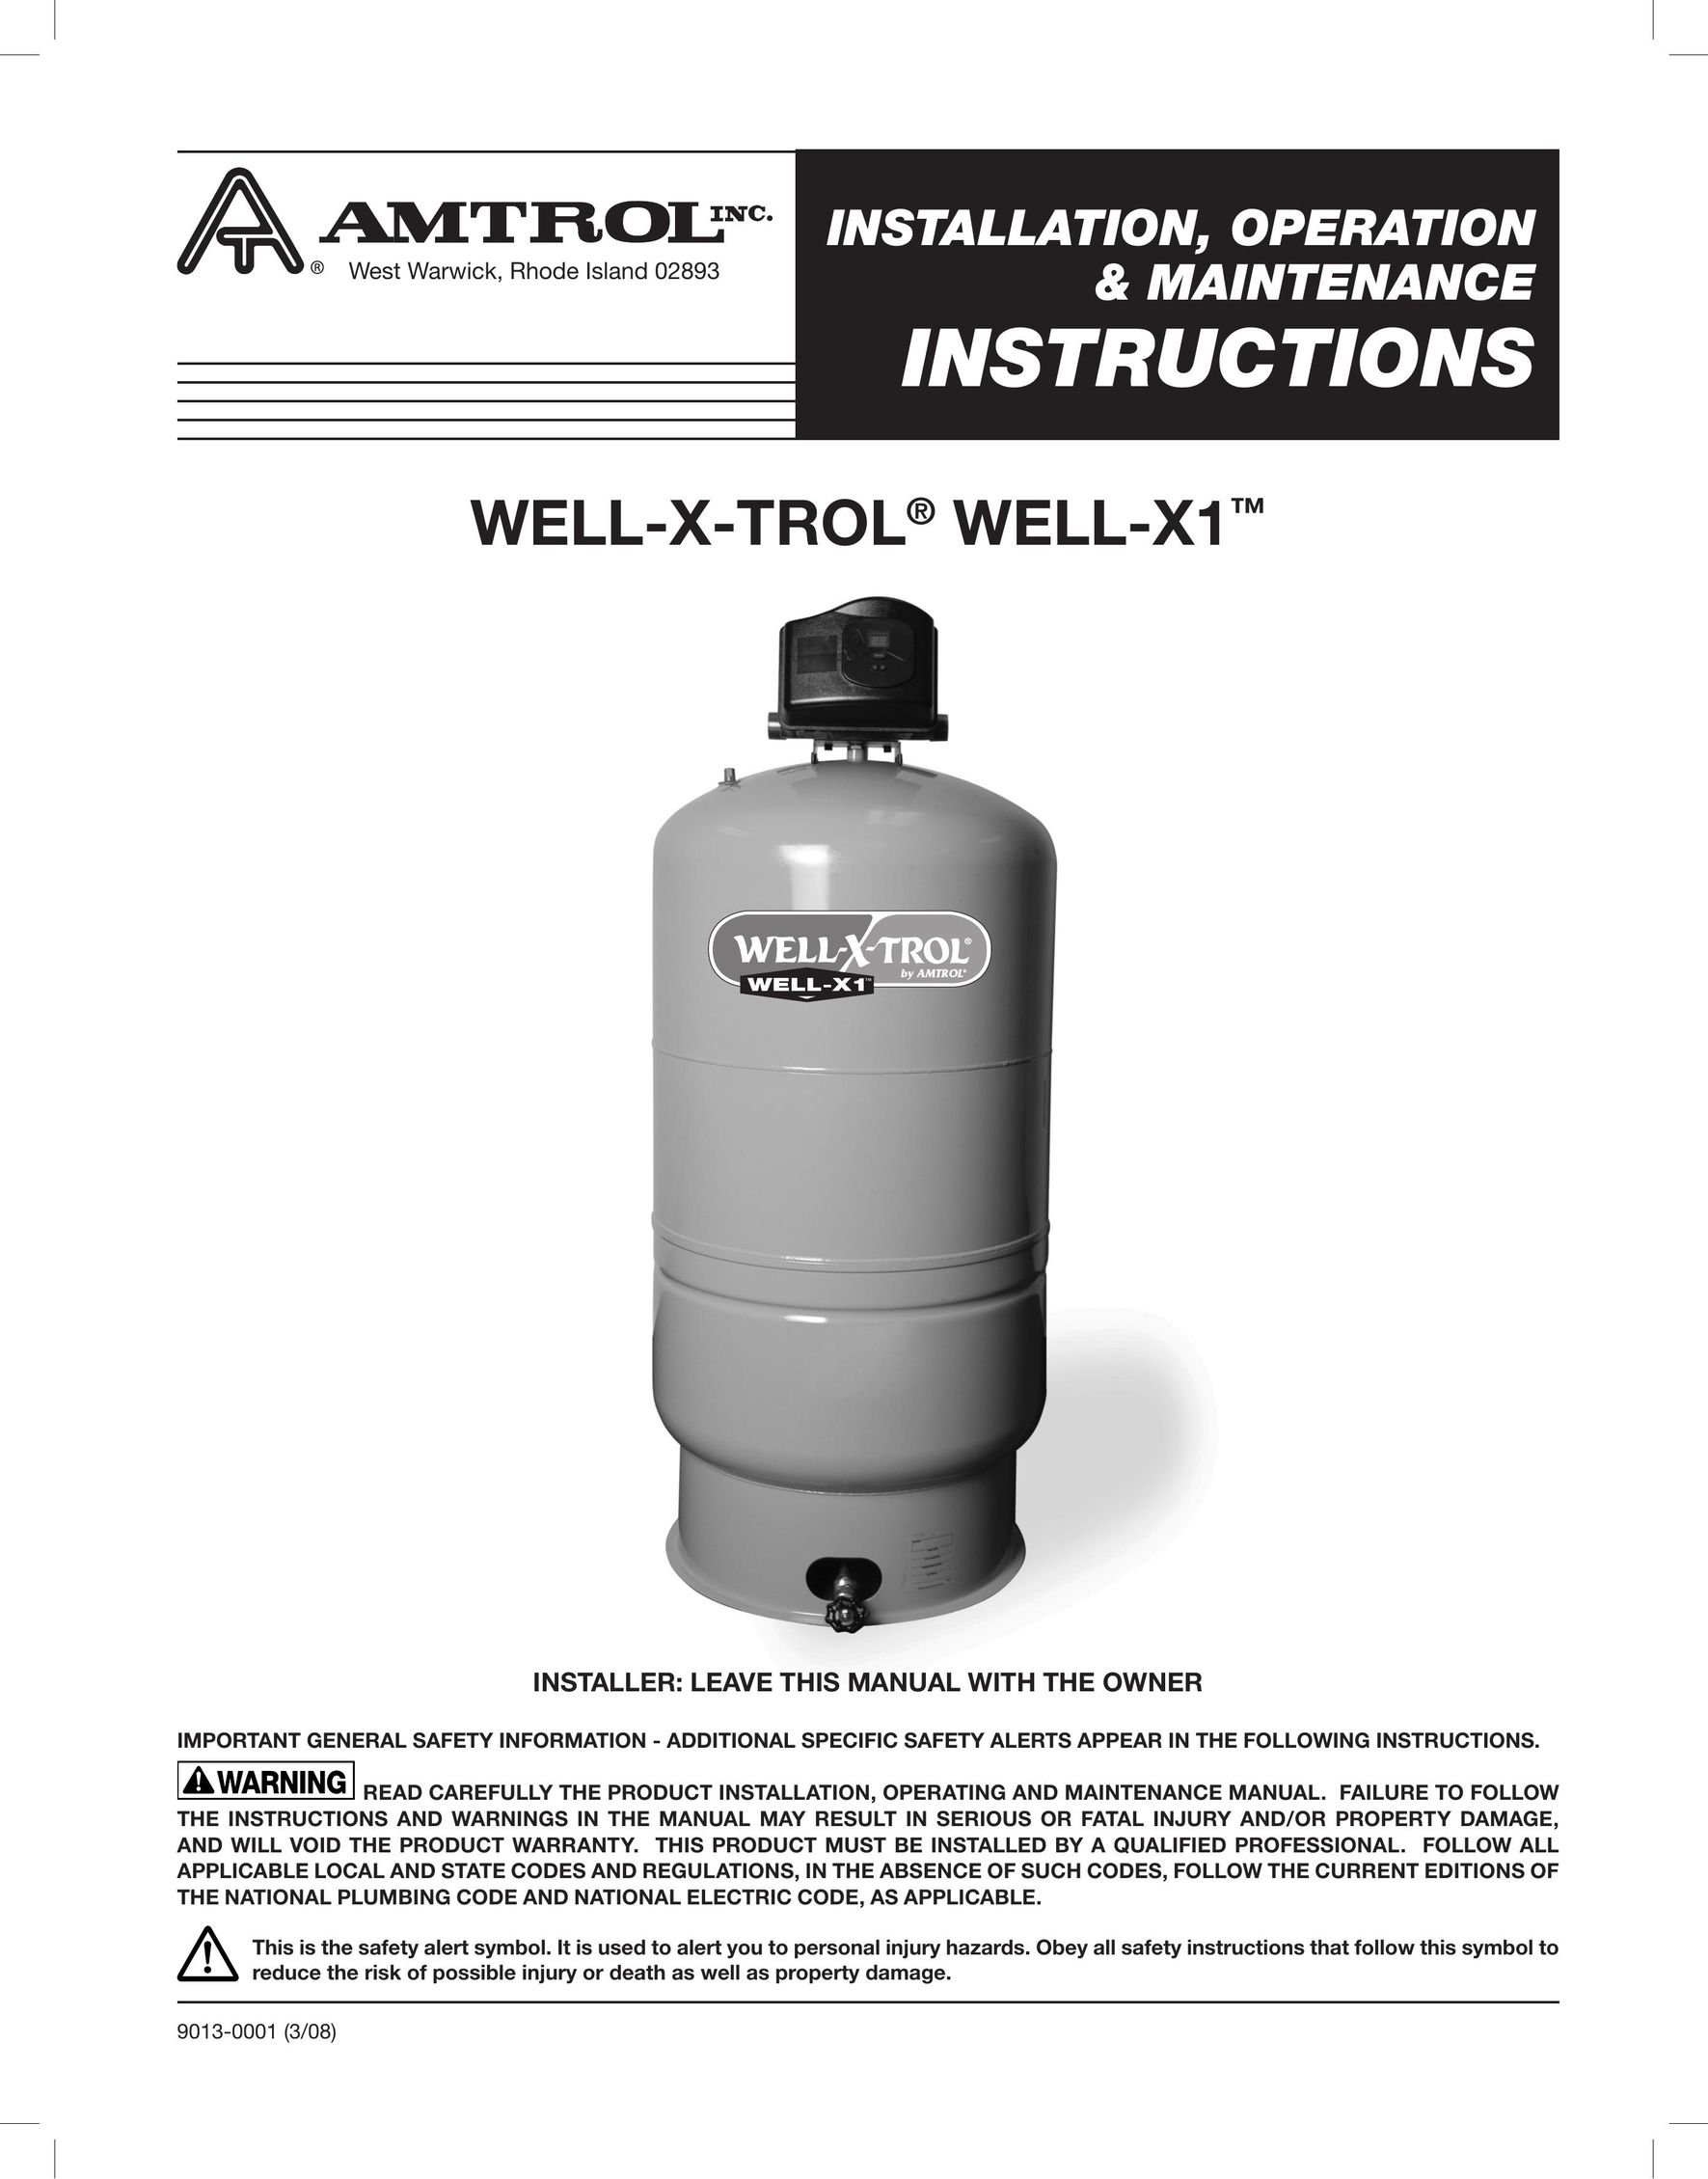 Amtrol WELL-X1 Water System User Manual